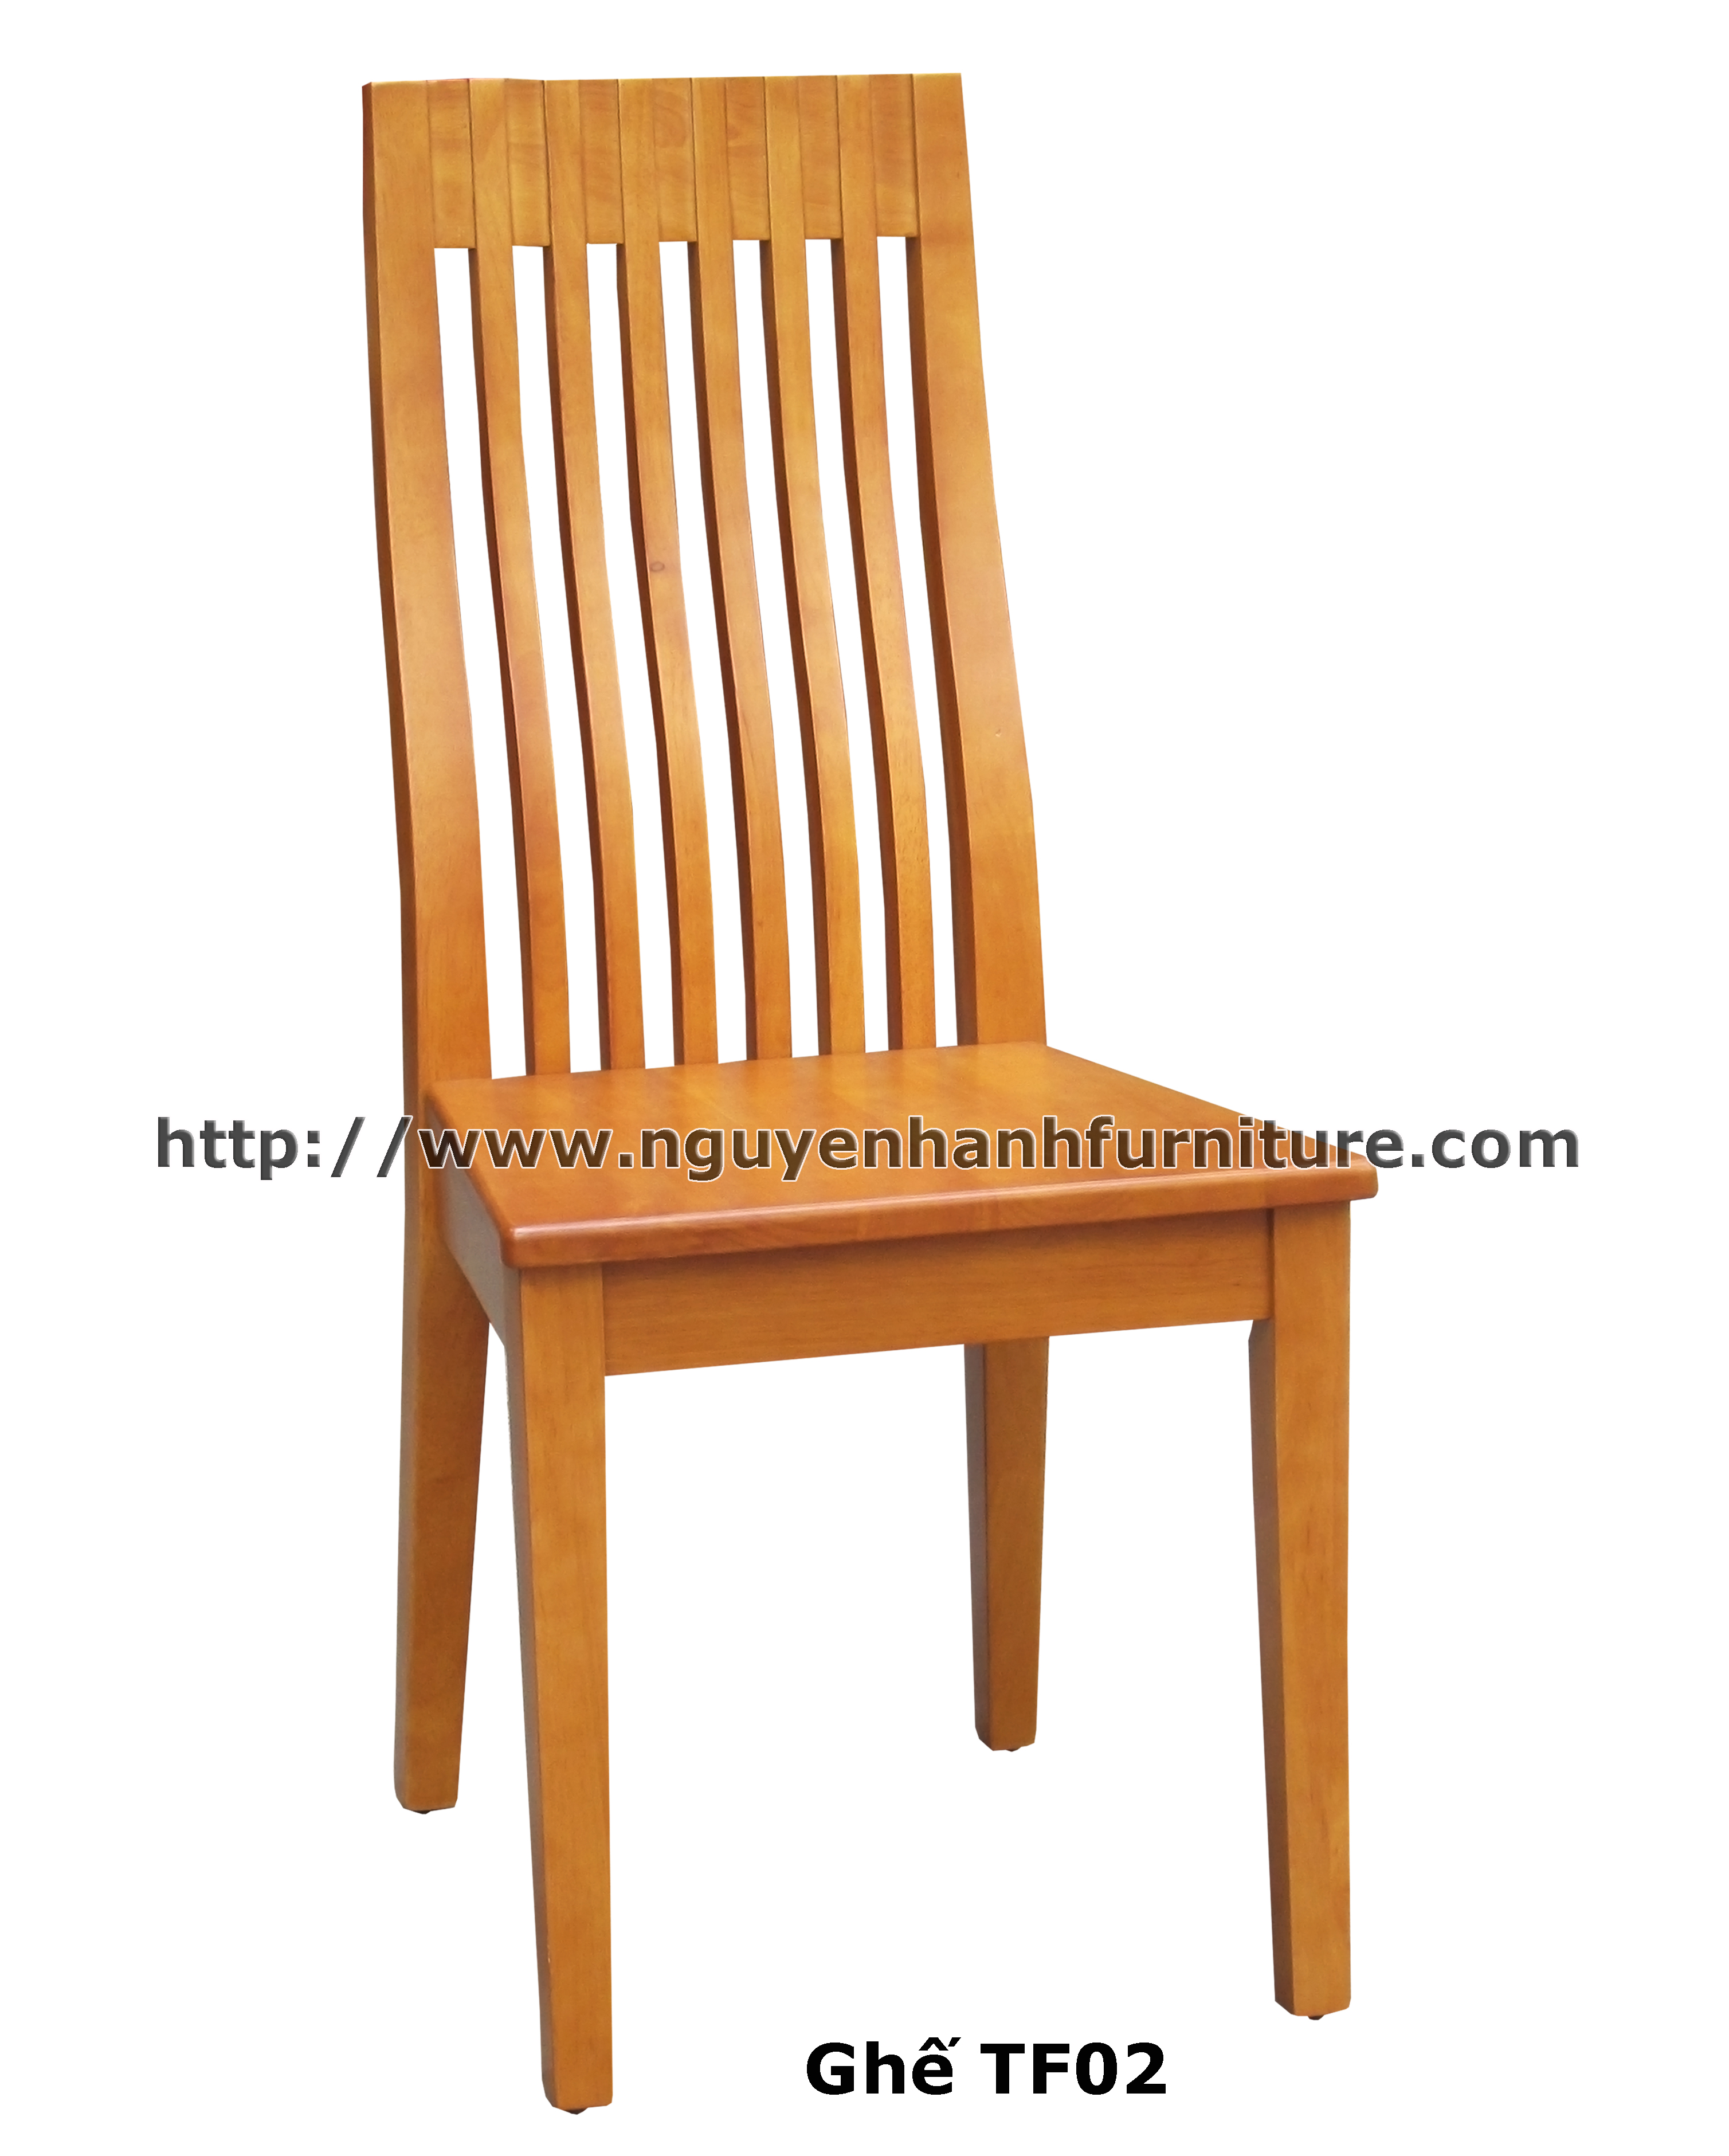 Name product: TF02 chair (Yellow) - Dimensions:  - Description: - Wood natural rubber